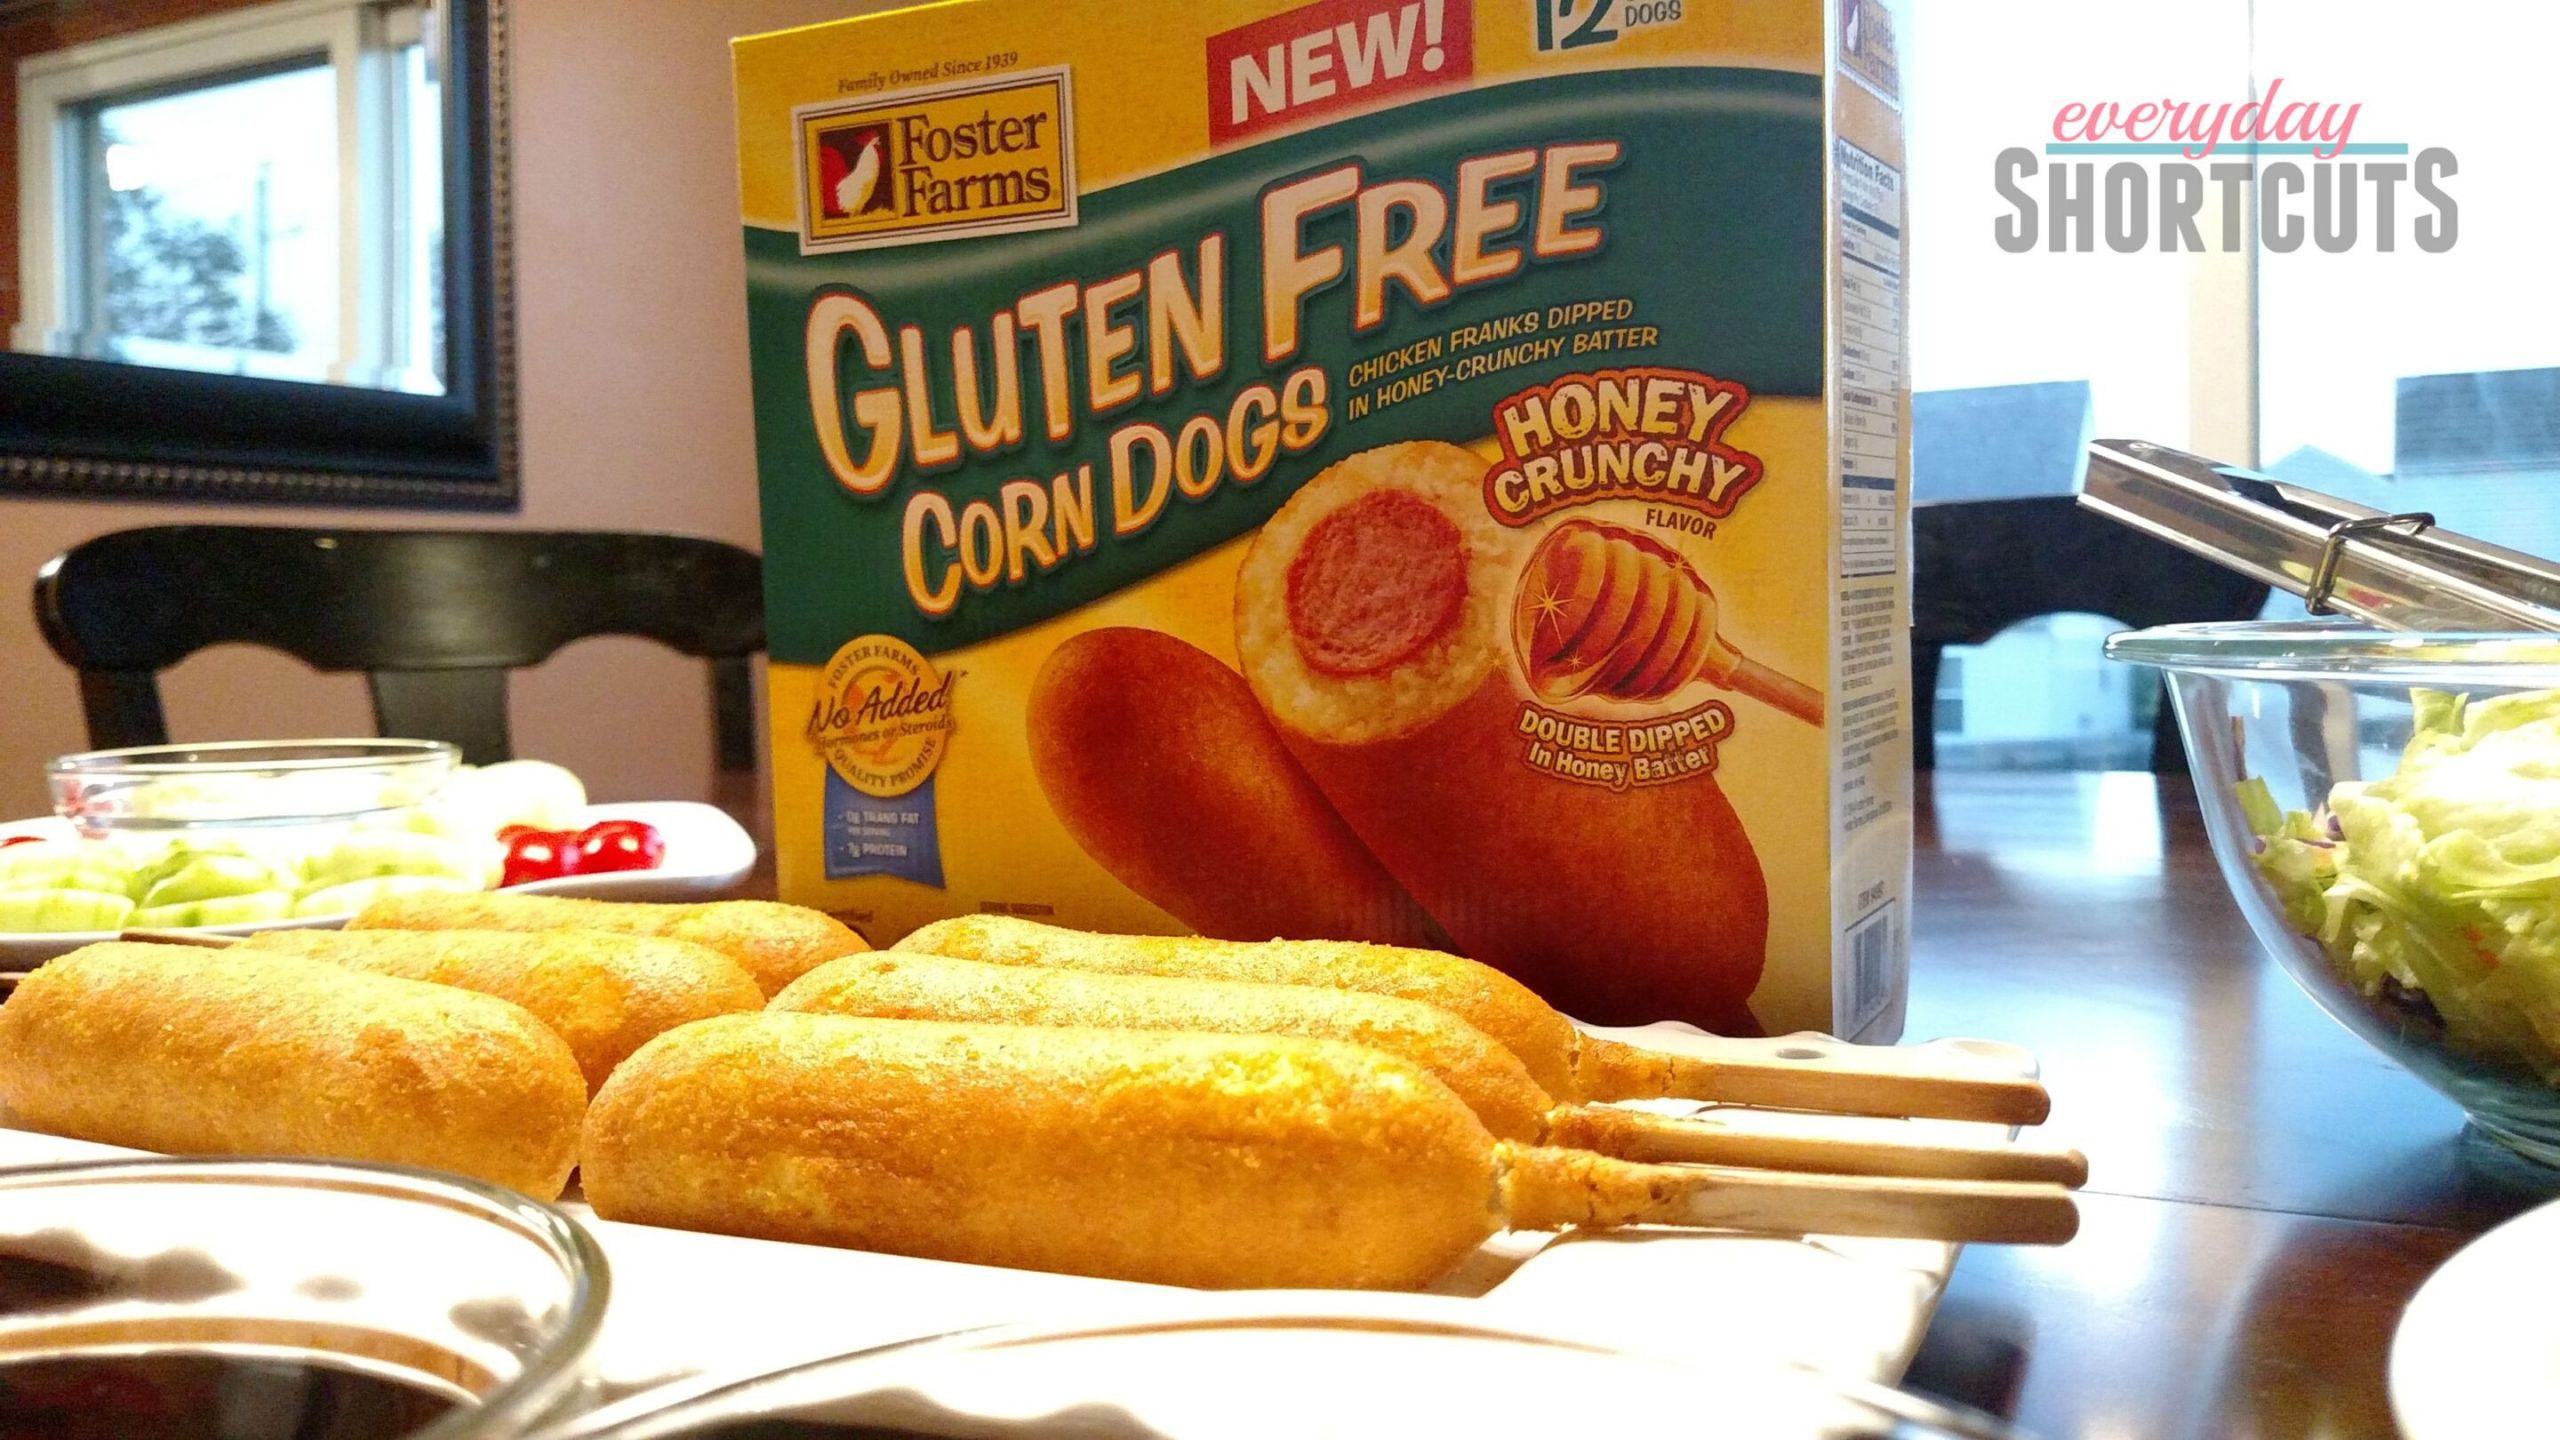 Gluten Free Corn Dogs
 Gluten Free Party with Foster Farms Everyday Shortcuts